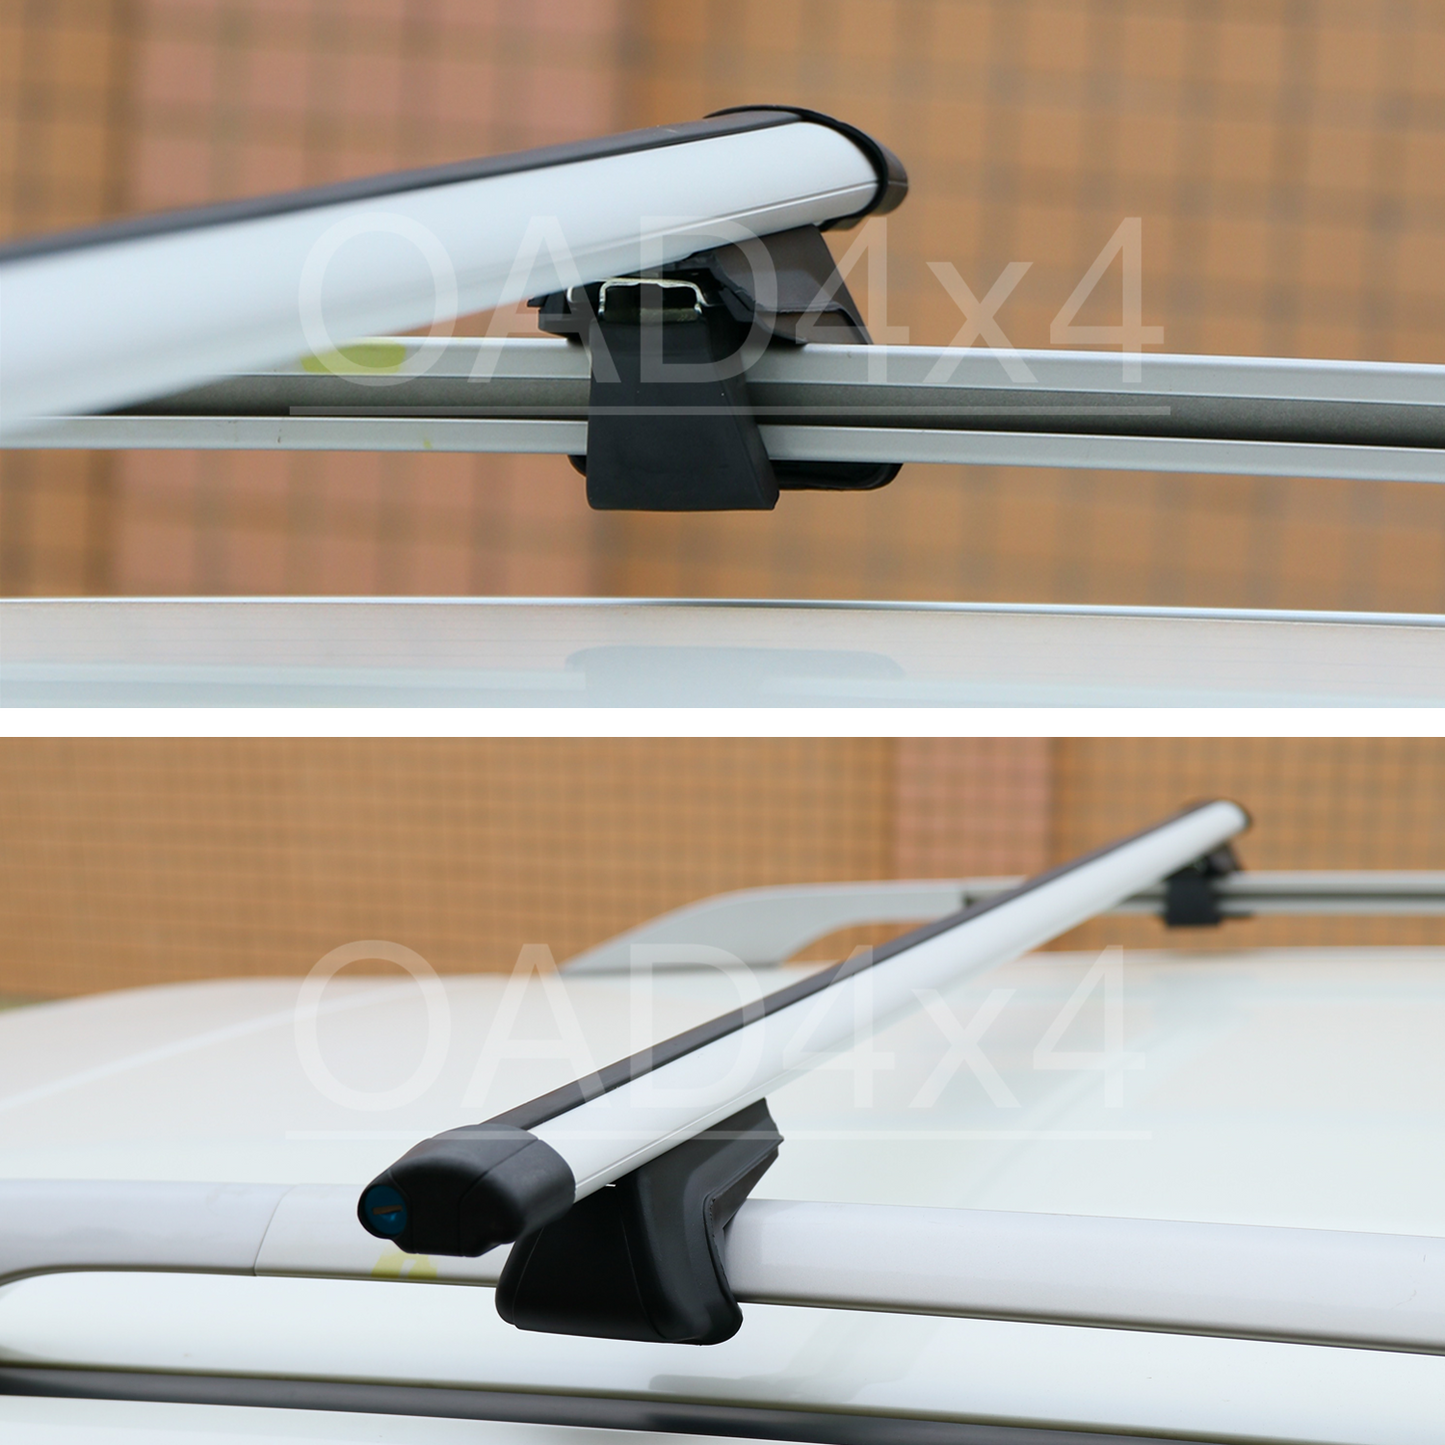 1 Pair Aluminum Silver Cross Bar Roof Racks Baggage holder for BMW 5 series 530i Wagon 00-09 with raised roof rail